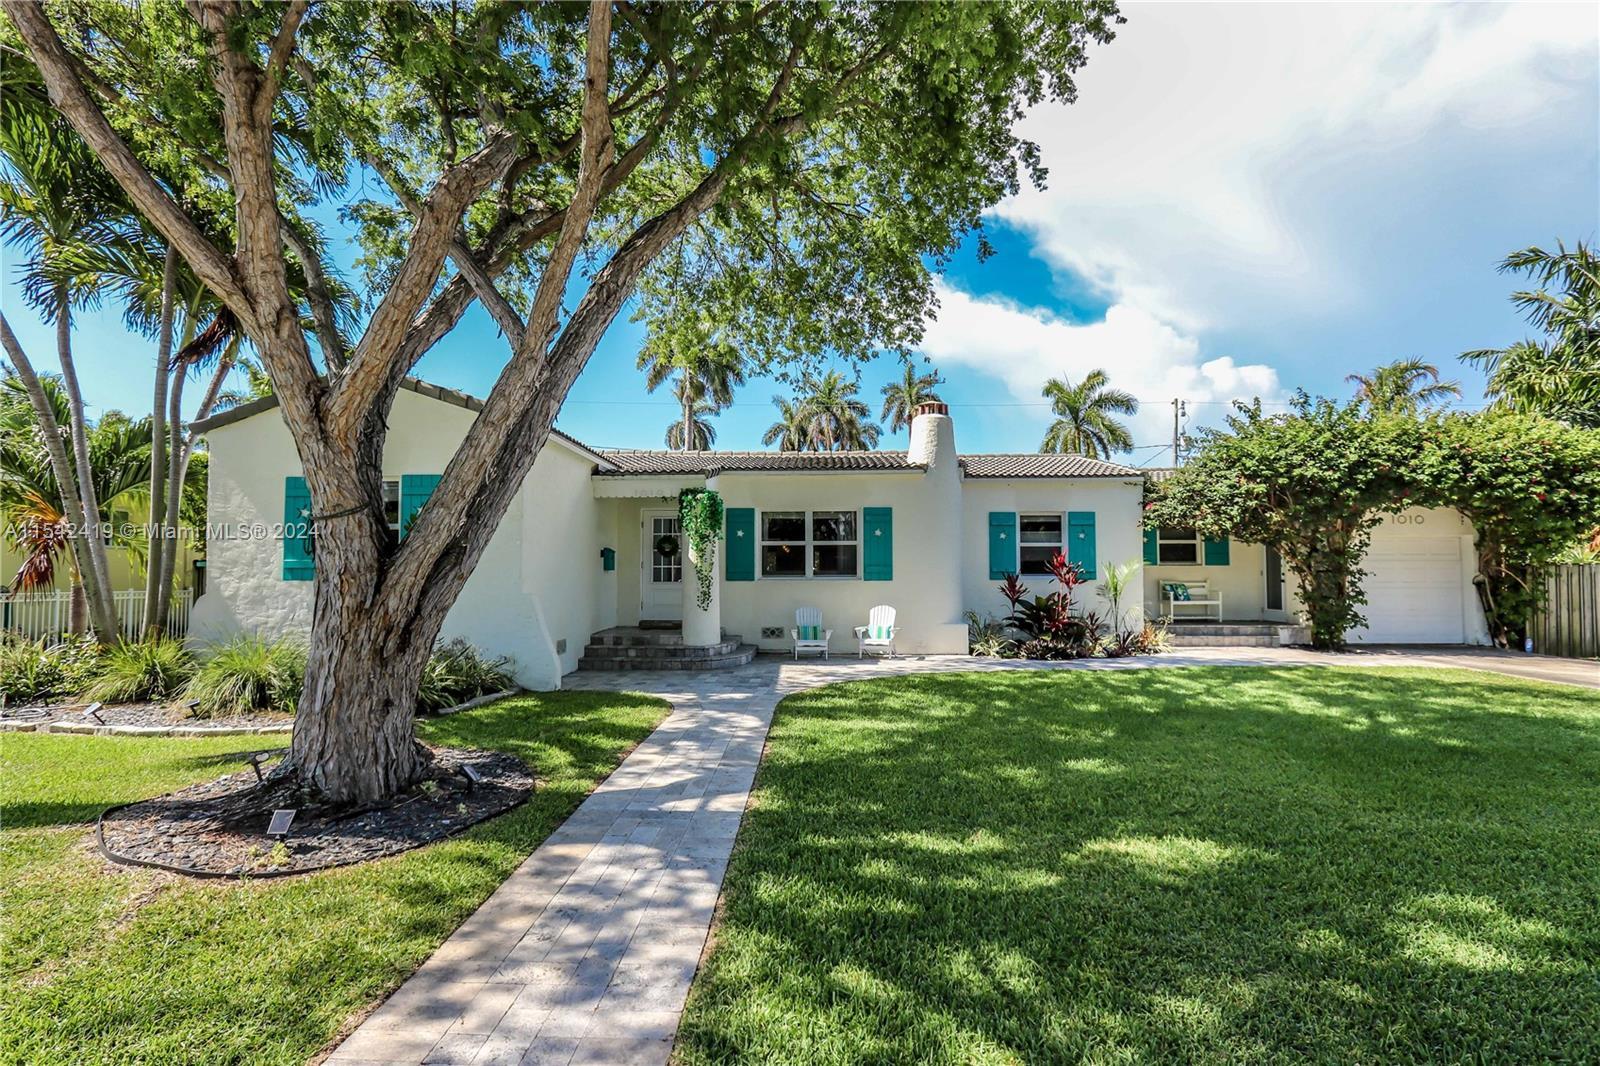 Photo of 1010 Tyler St in Hollywood, FL